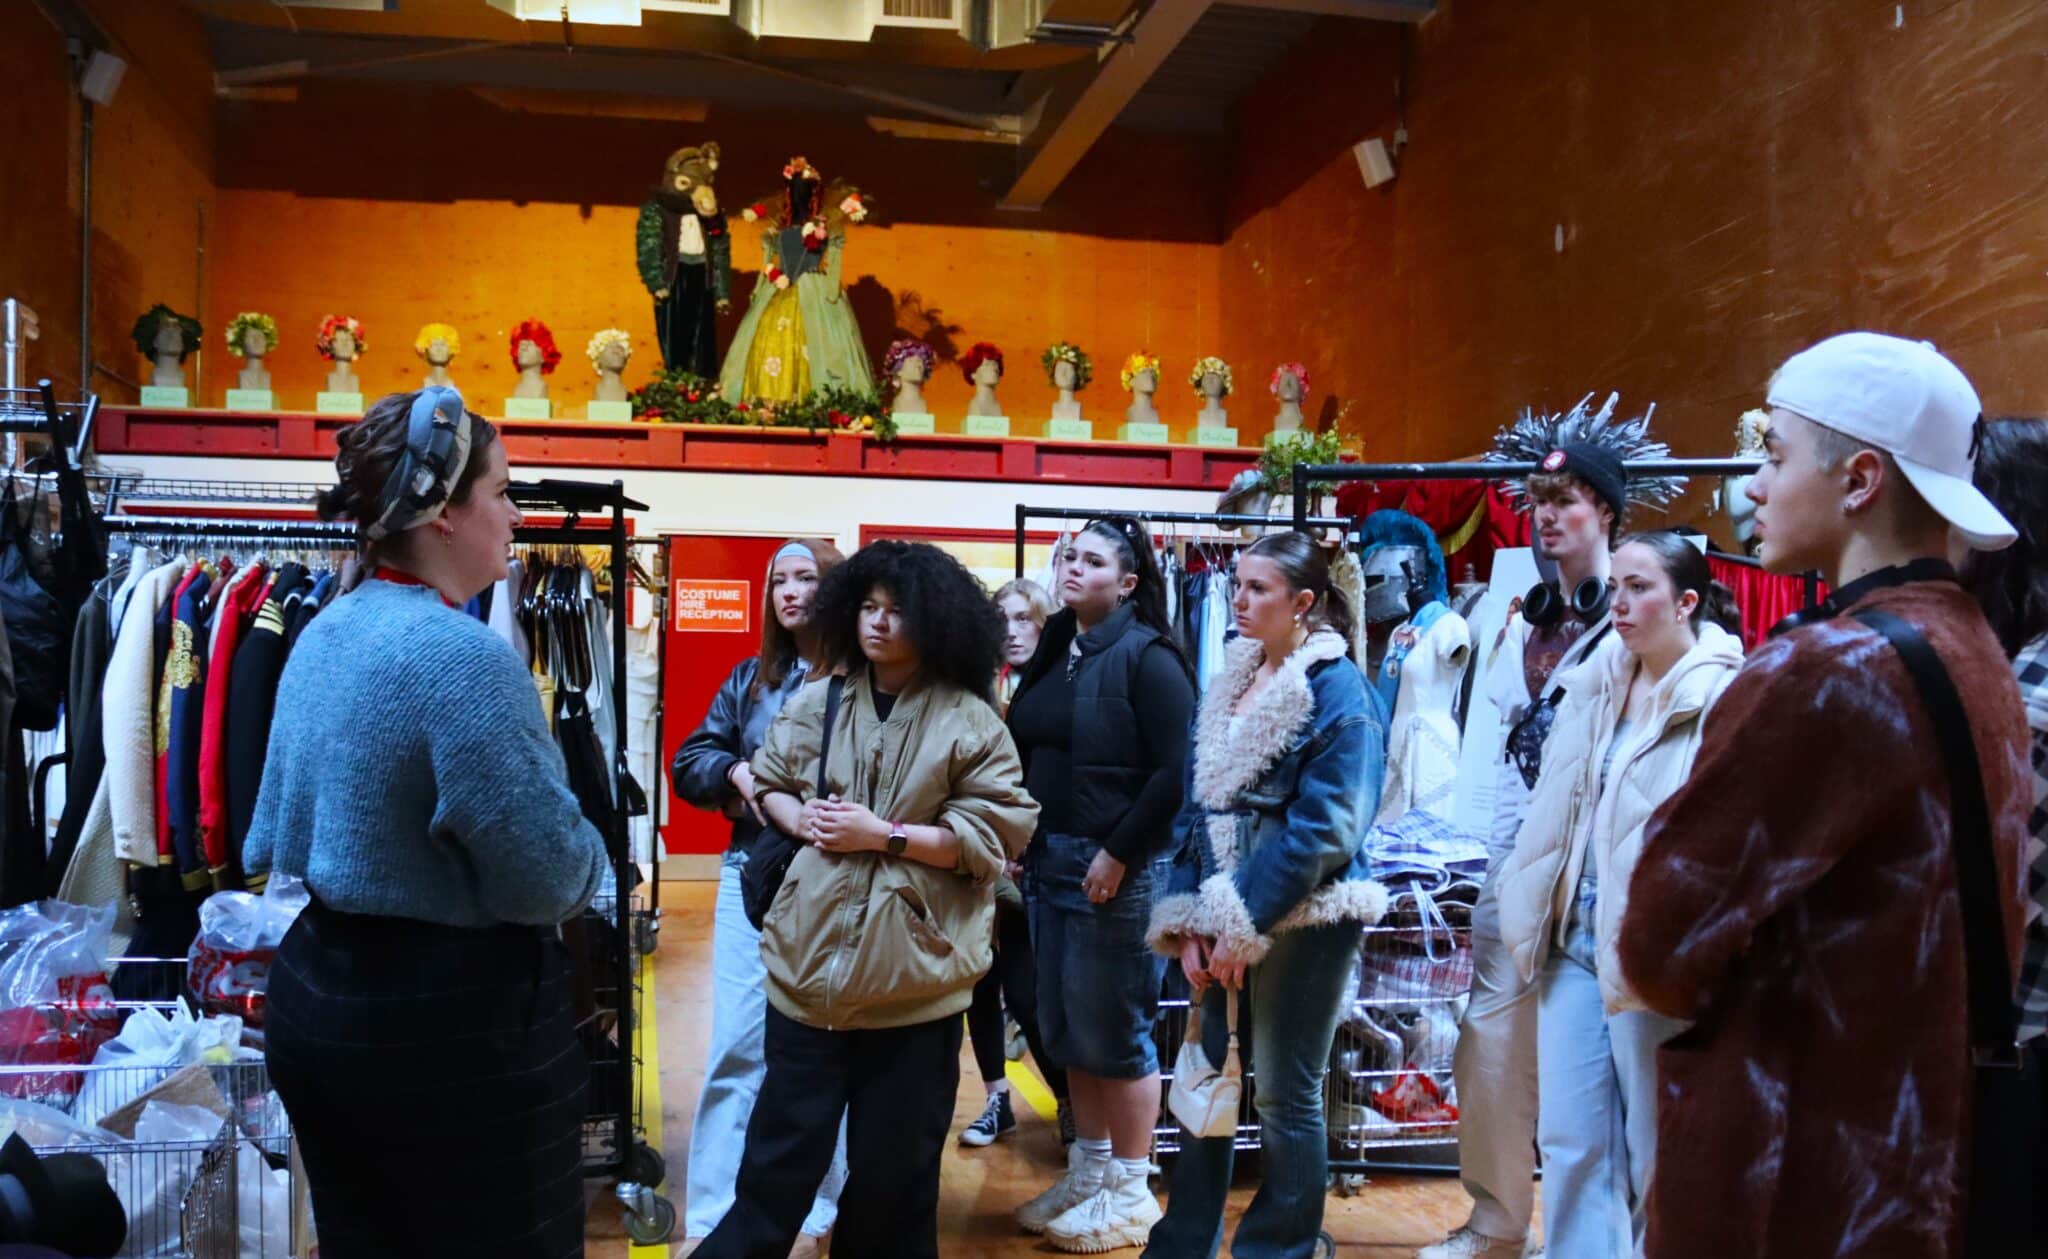 Fashion students visit the RSC - learning